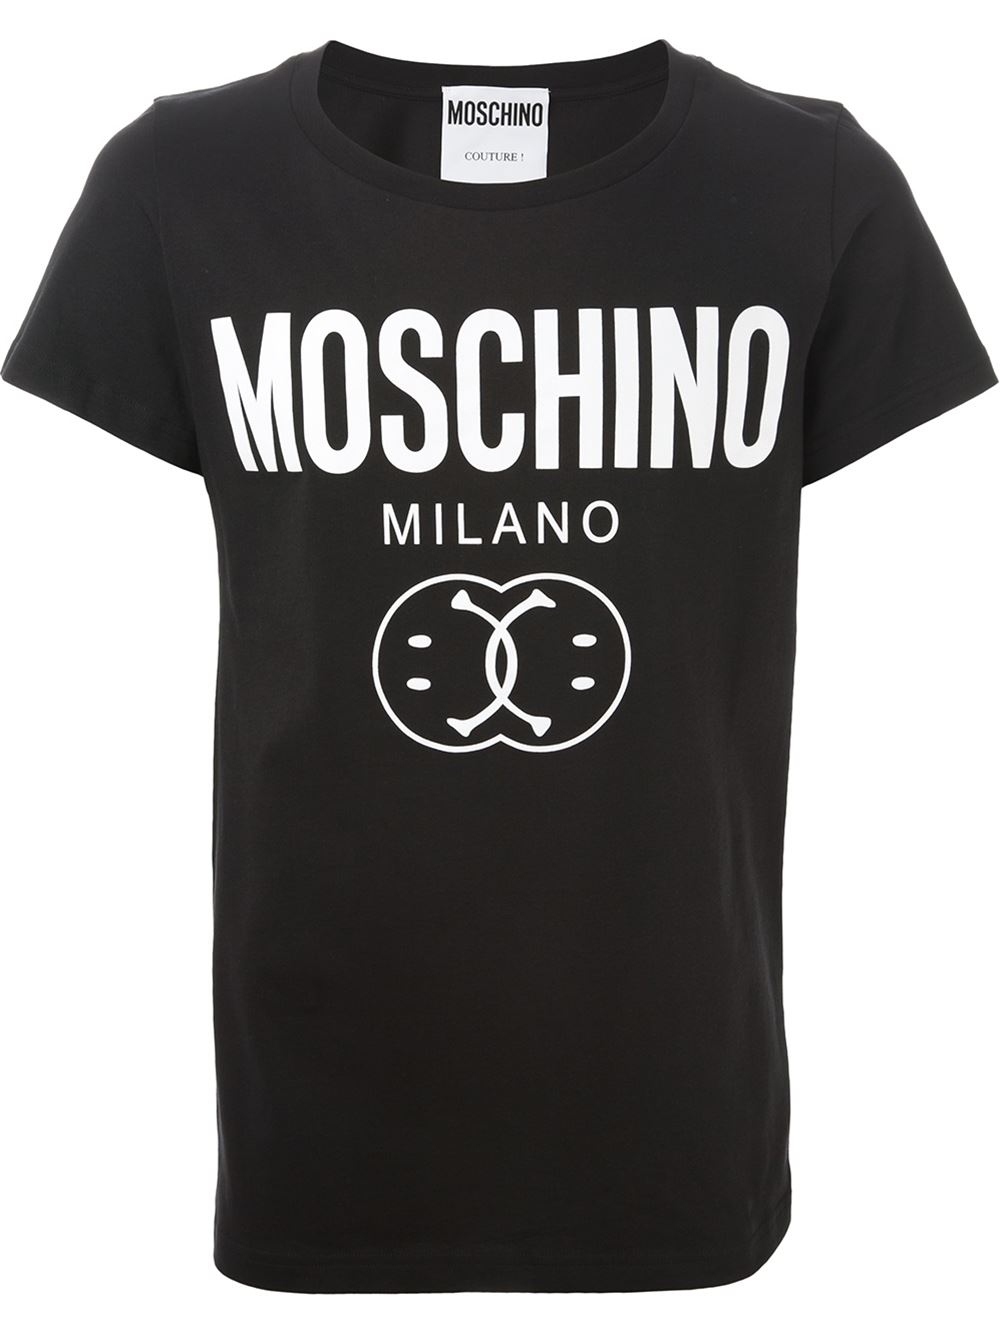 Moschino Smiley And Logo-Print T-Shirt in Black for Men - Lyst